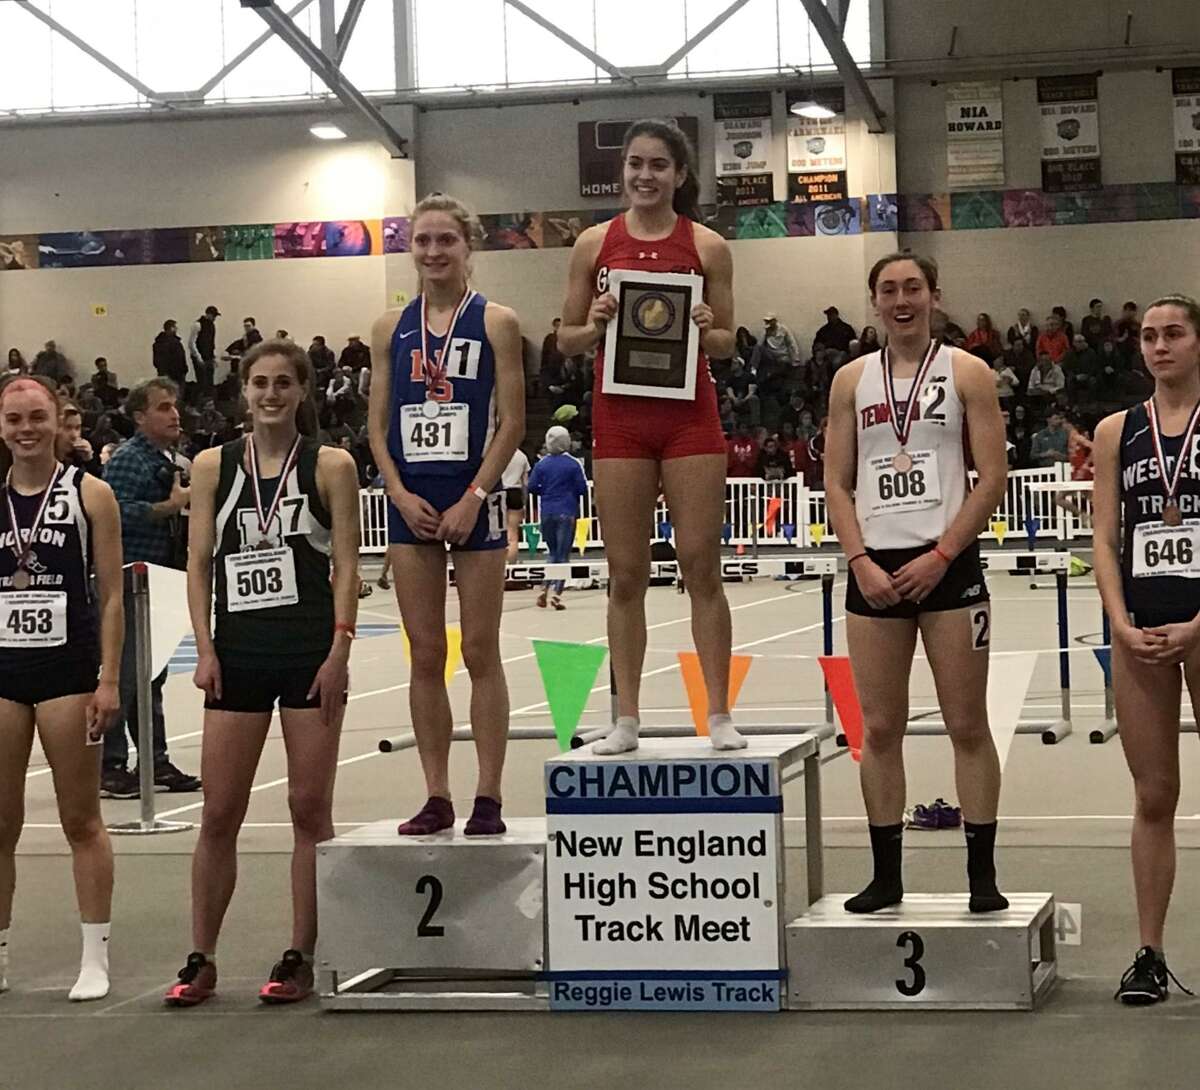 Philippides wins 1,000meter run at New England finals